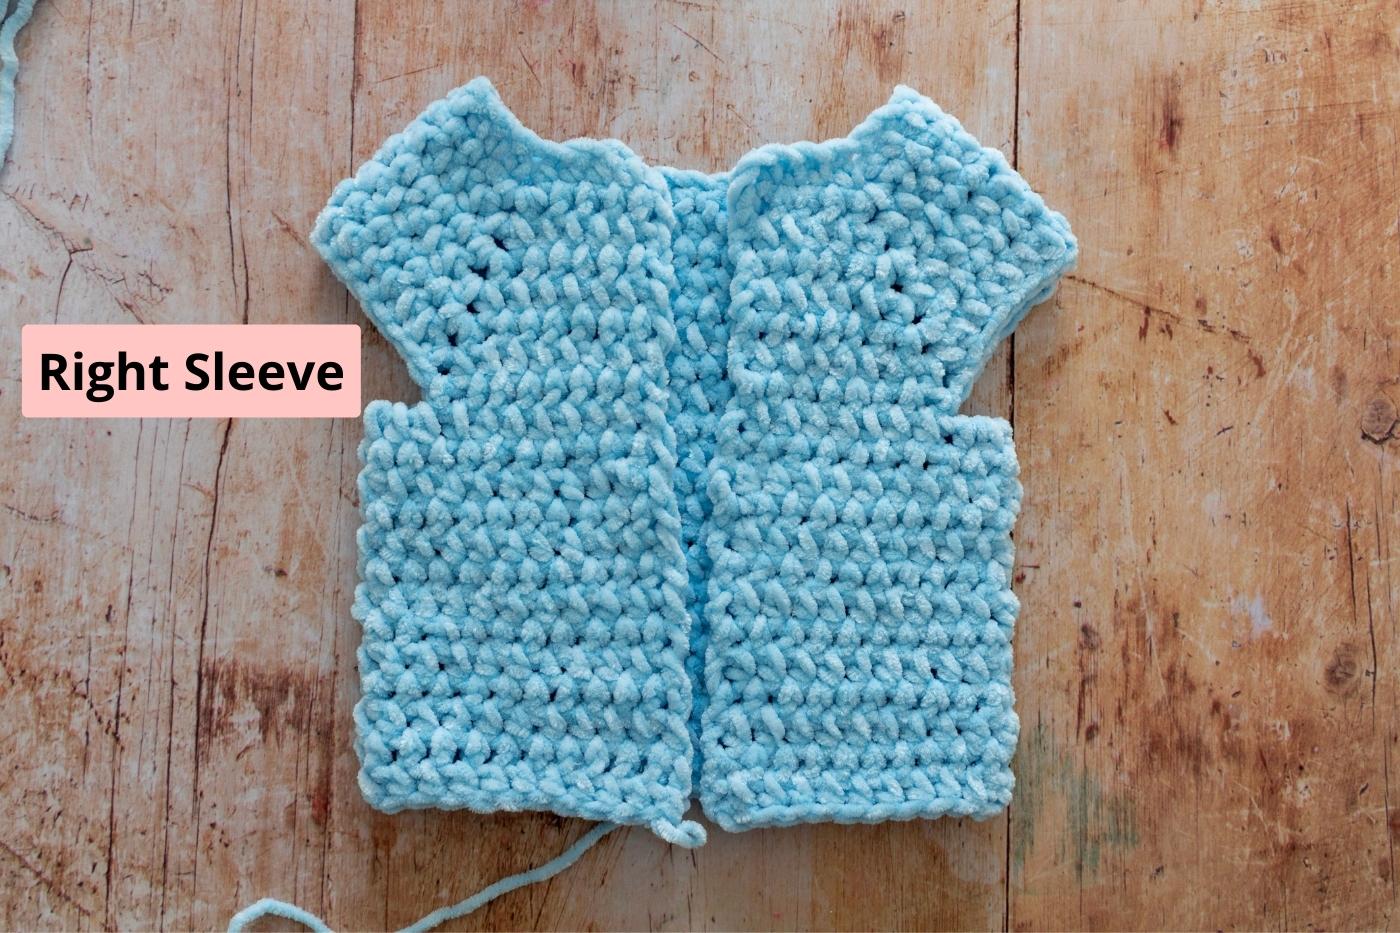 Position of Right Sleeve of crochet baby hoodie